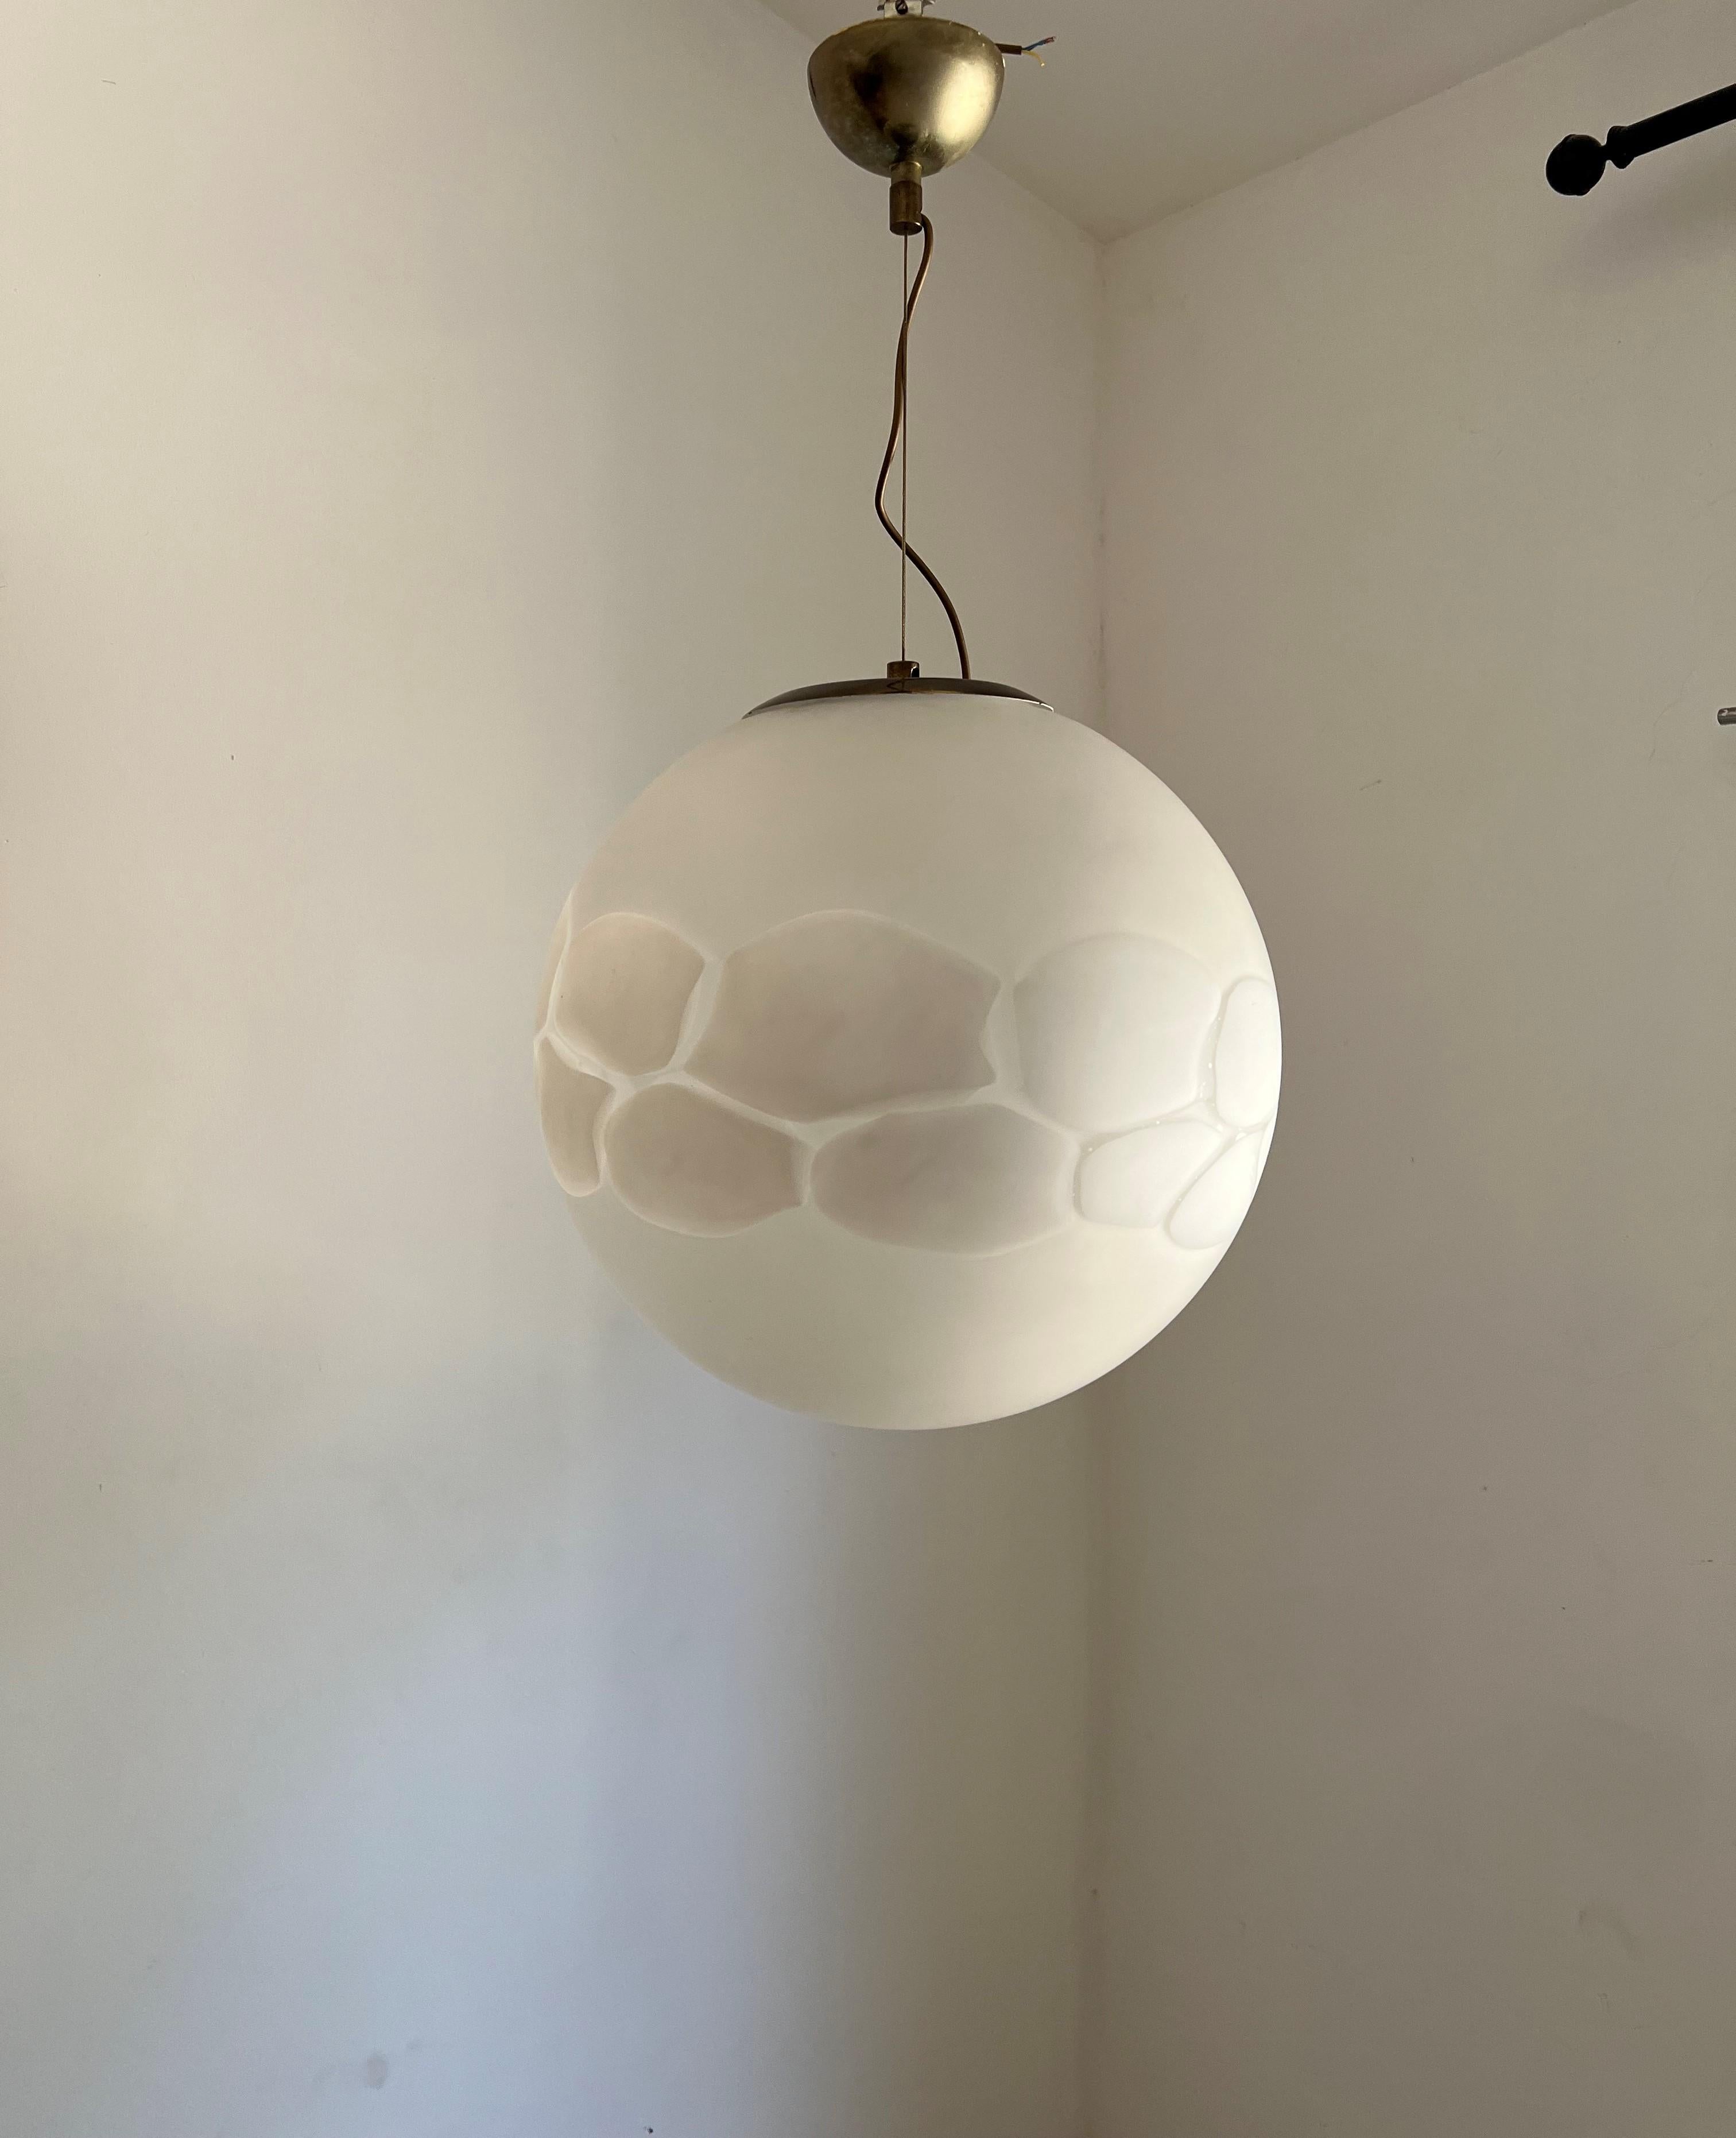 Space Age pendant light manufactured in white and clear hand blown Murano glass, in the style of Mazzega, circa 1970.
This is a very large sphere measuring 46 cm in diameter. (lage spheres run around 38-40 cm)
Height is 80 cm but can be easily